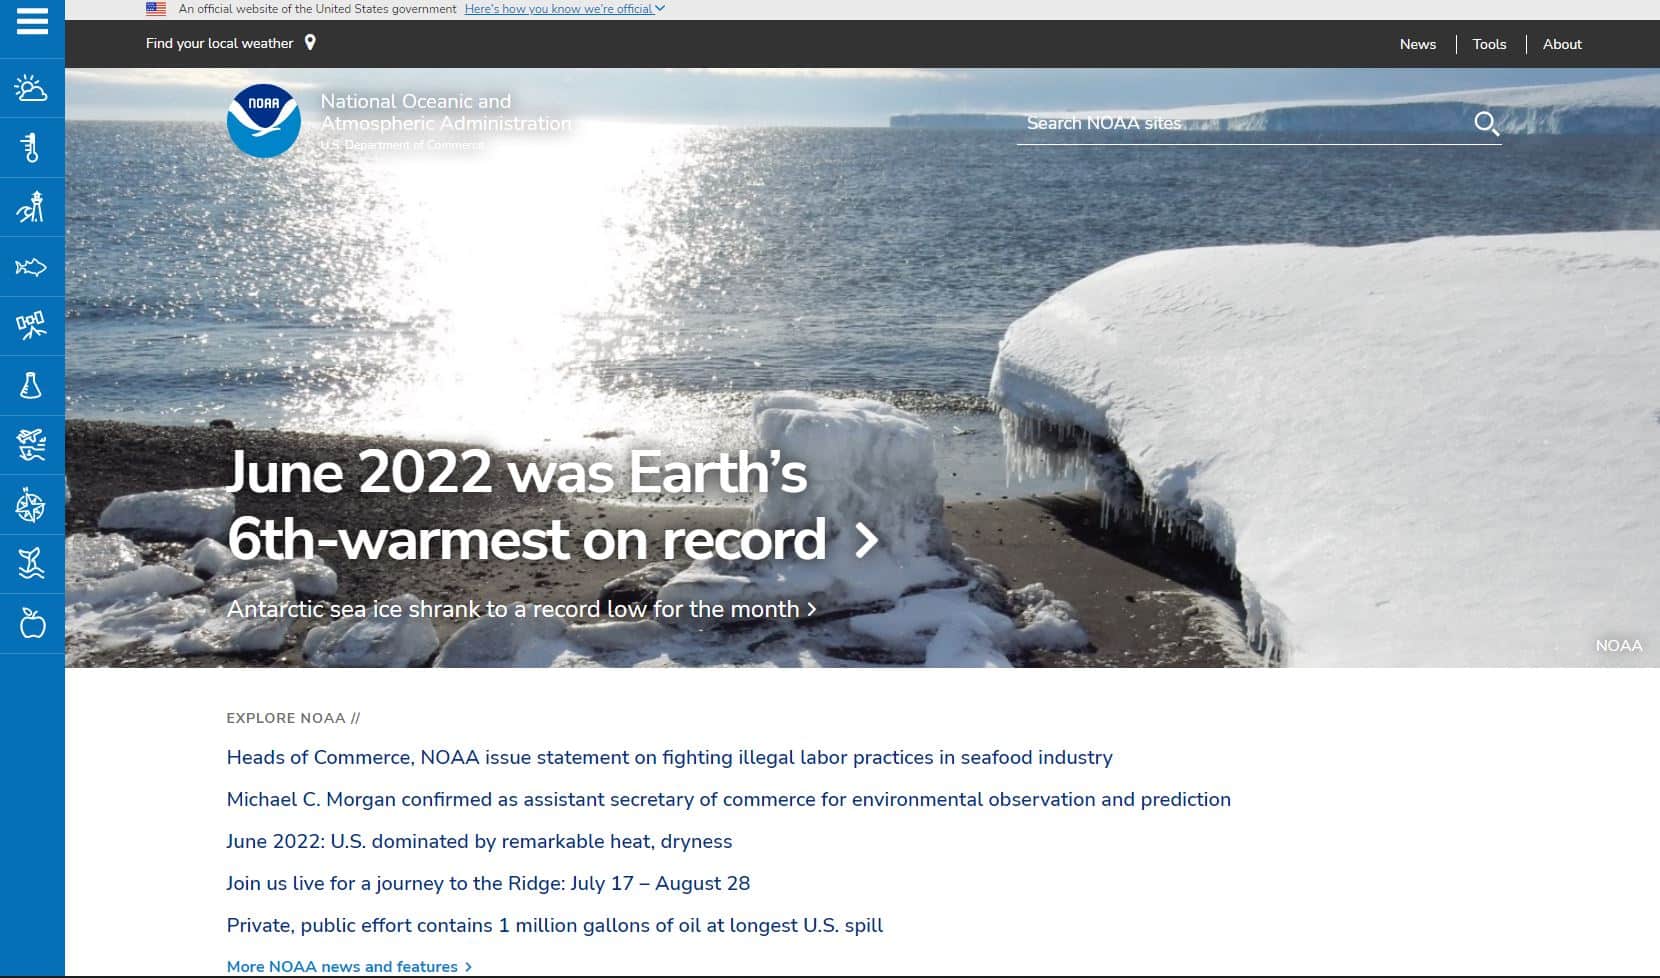 Simple User Interface The National Oceanic and Atmospheric Administration (NOAA) Website